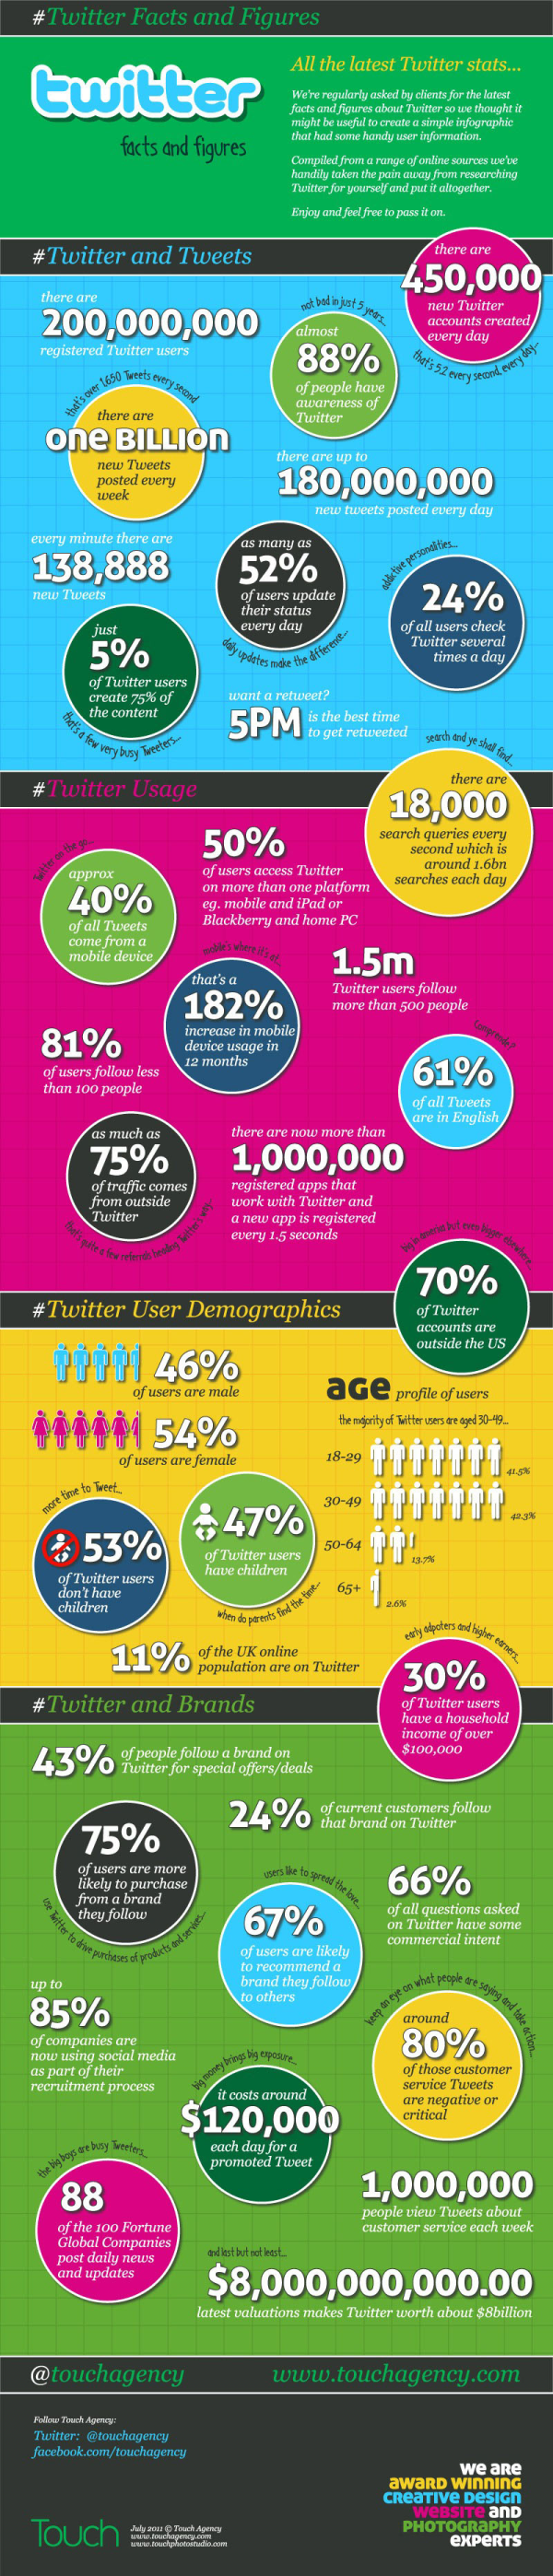 Twitter Facts and Figures resized 600